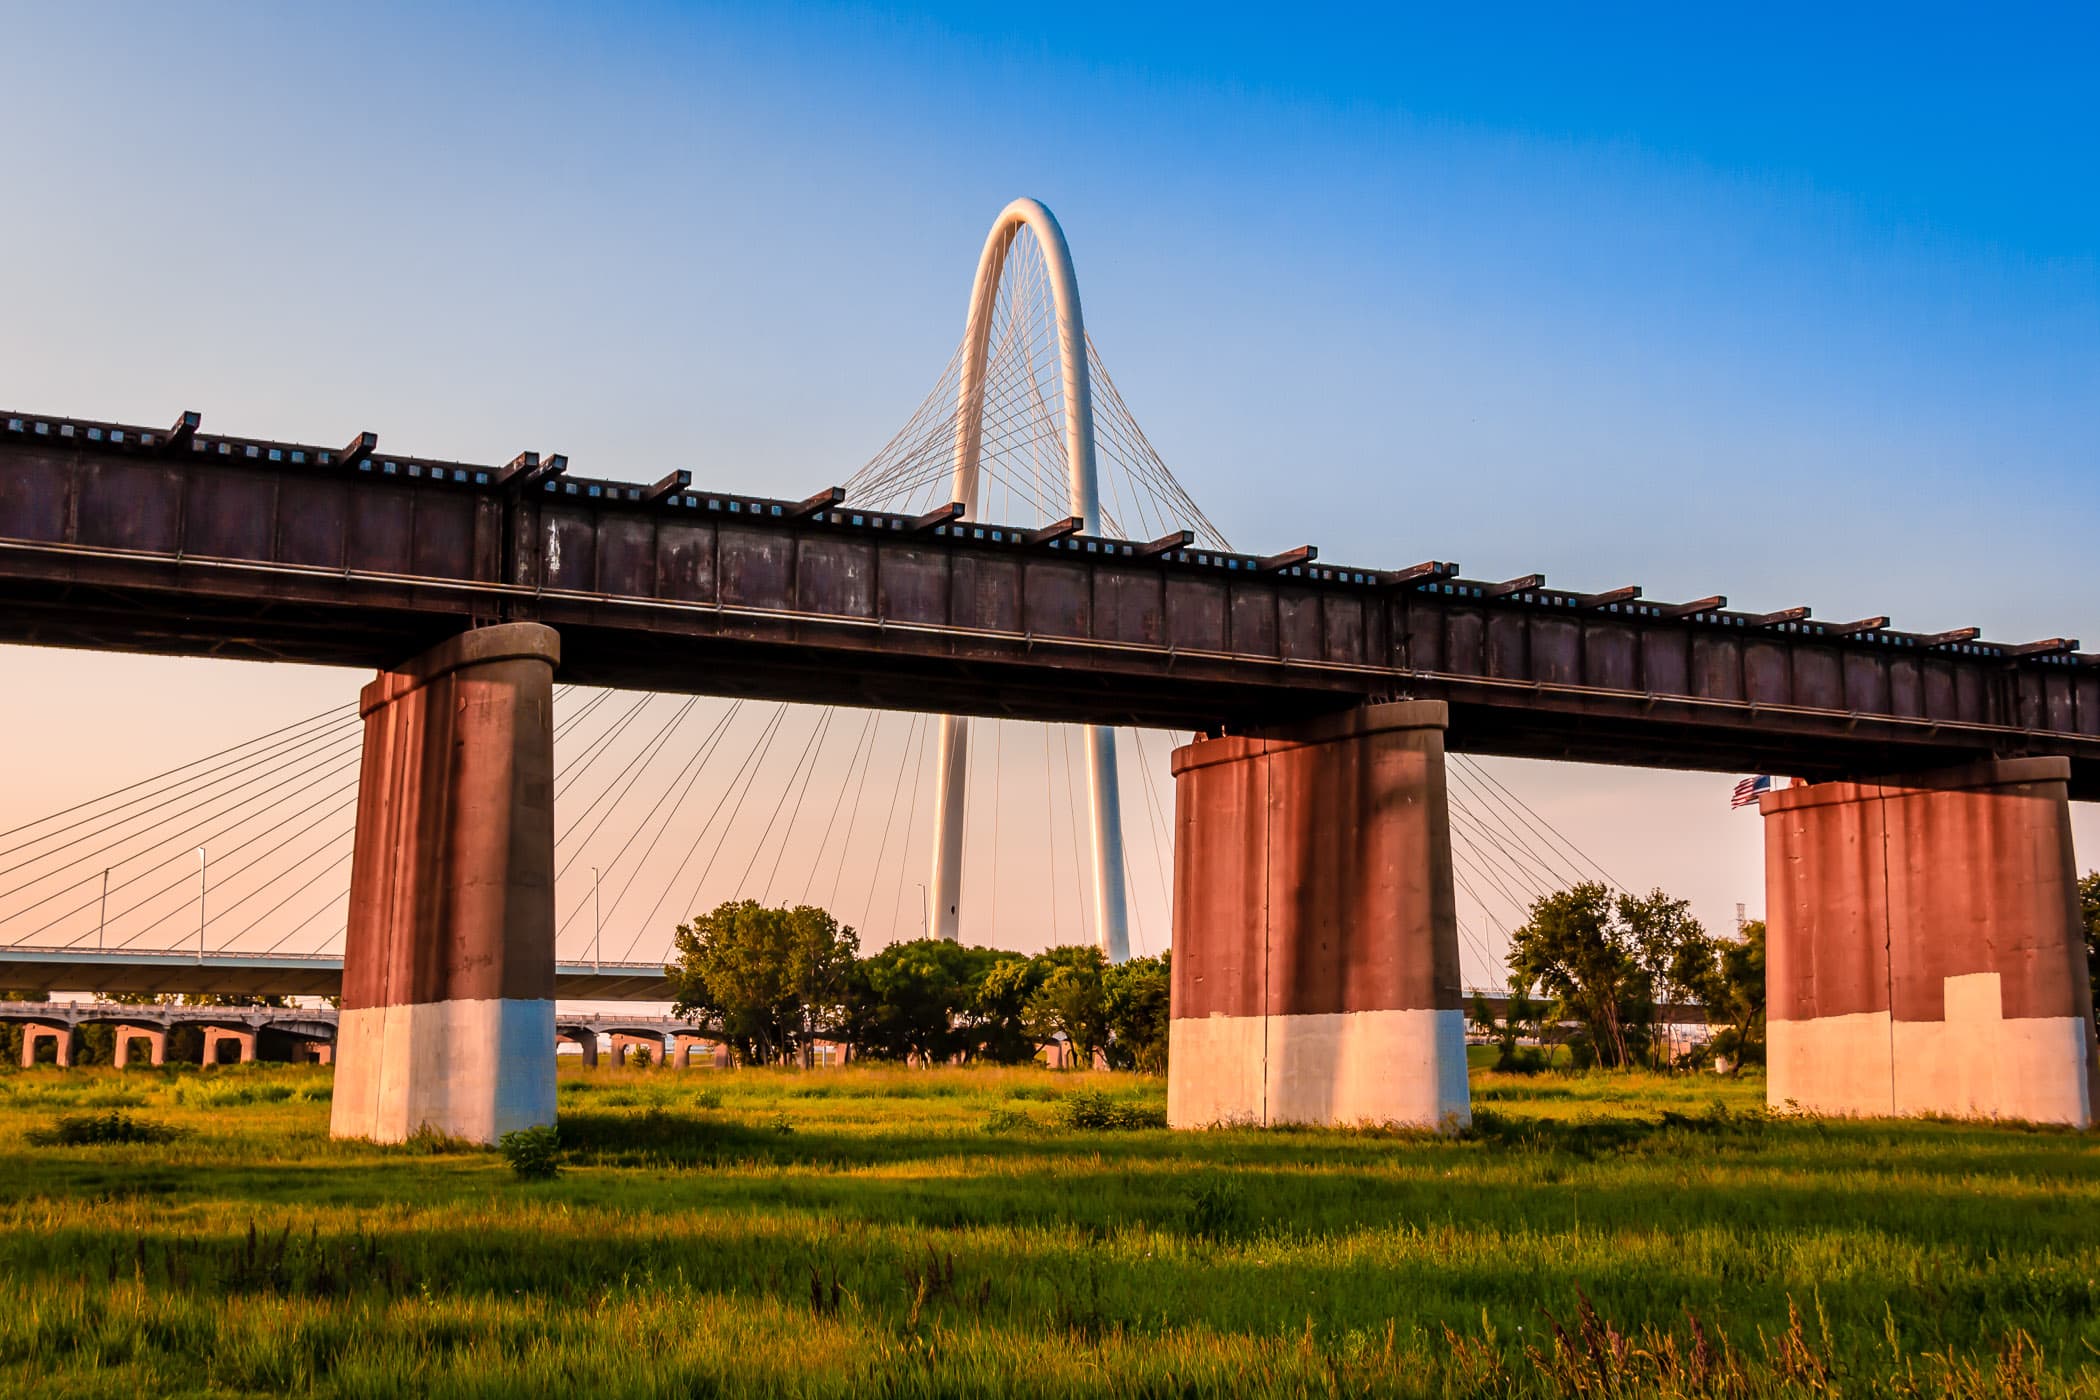 A railroad bridge, in the foreground, is overwhelmed by the massive arch and cables of Dallas' Margaret Hunt Hill Bridge as the sun sets over the DFW Metroplex.